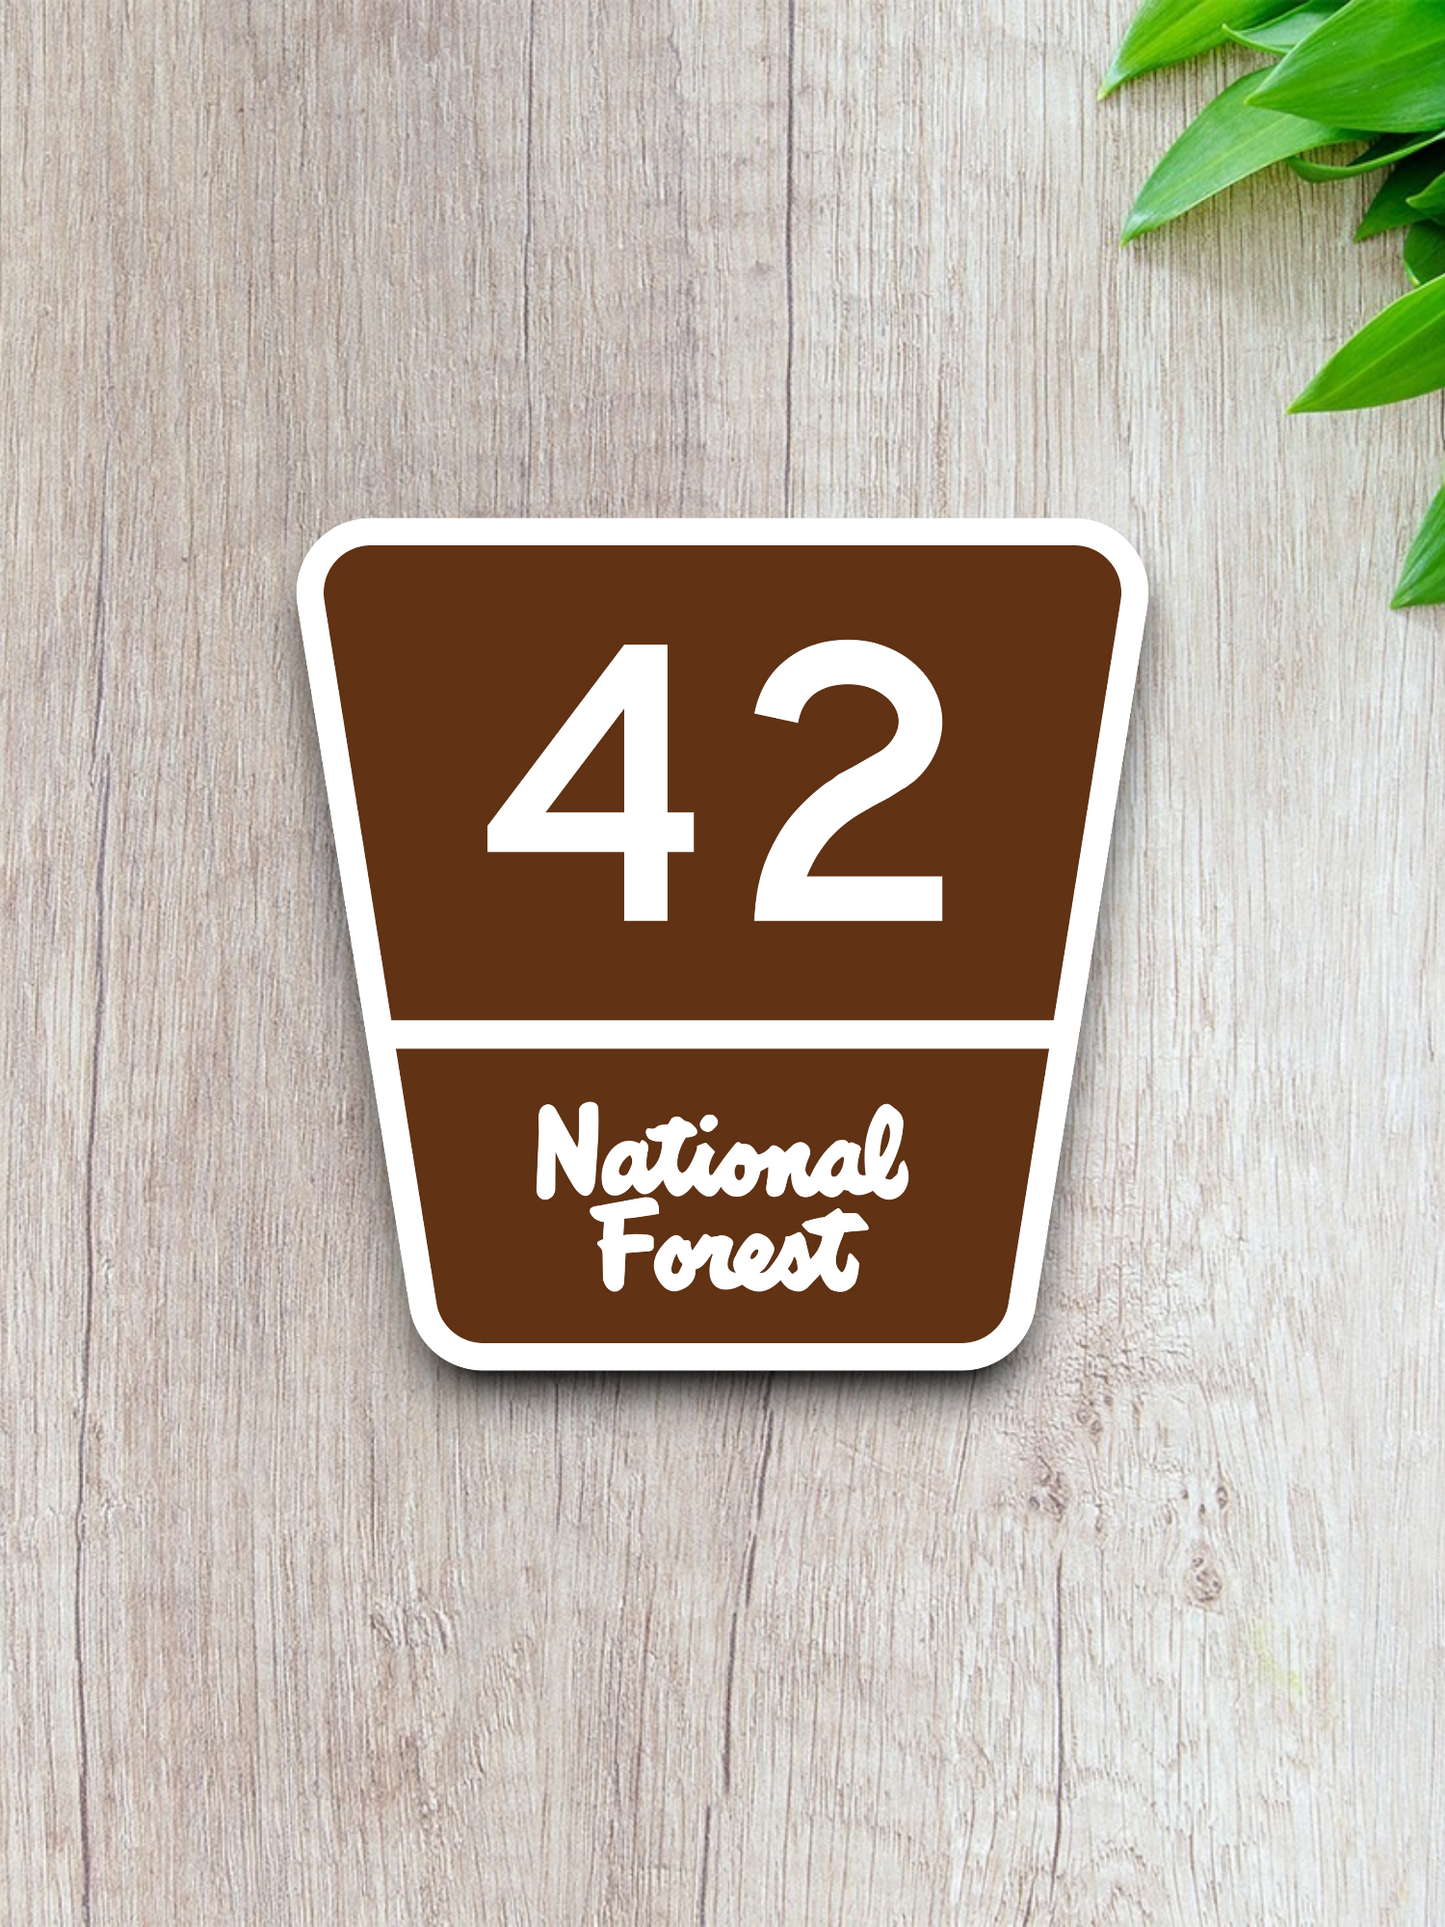 Forest Highway Route 42 Sticker